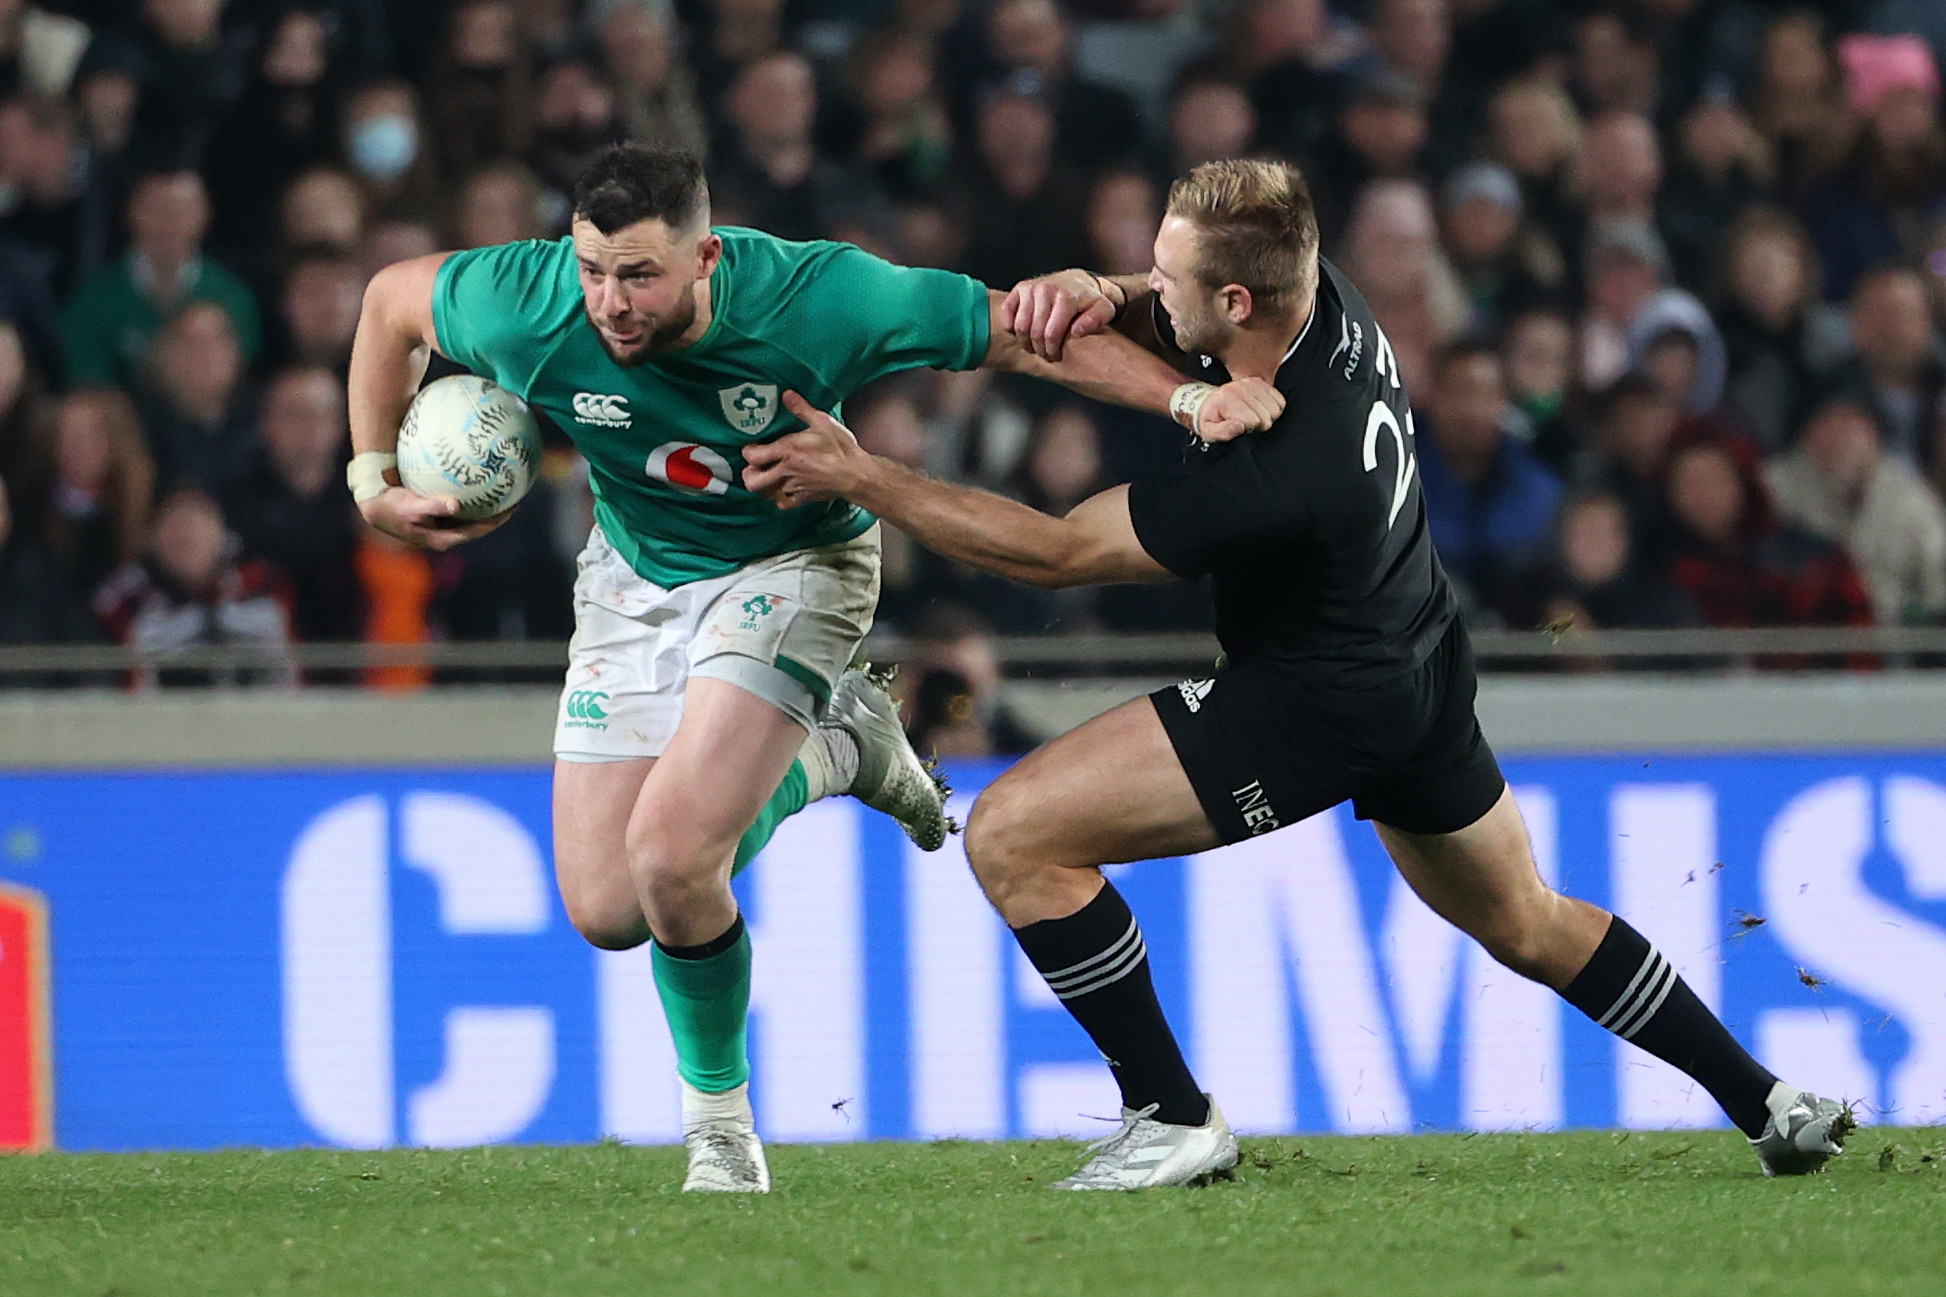 How to watch New Zealand vs Ireland second test